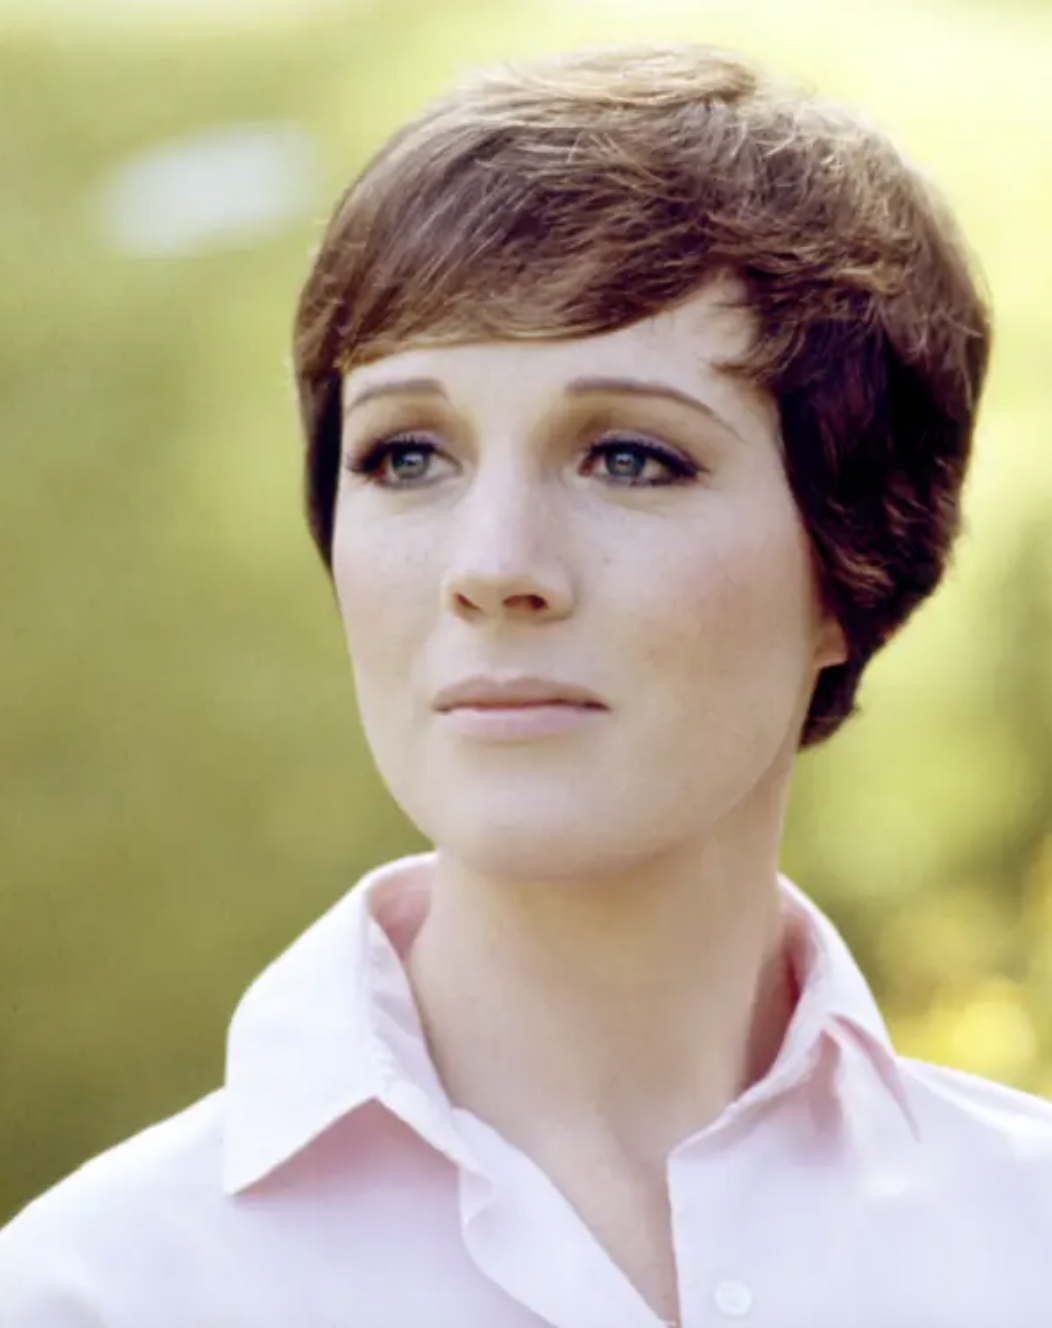 Young Julie Andrews